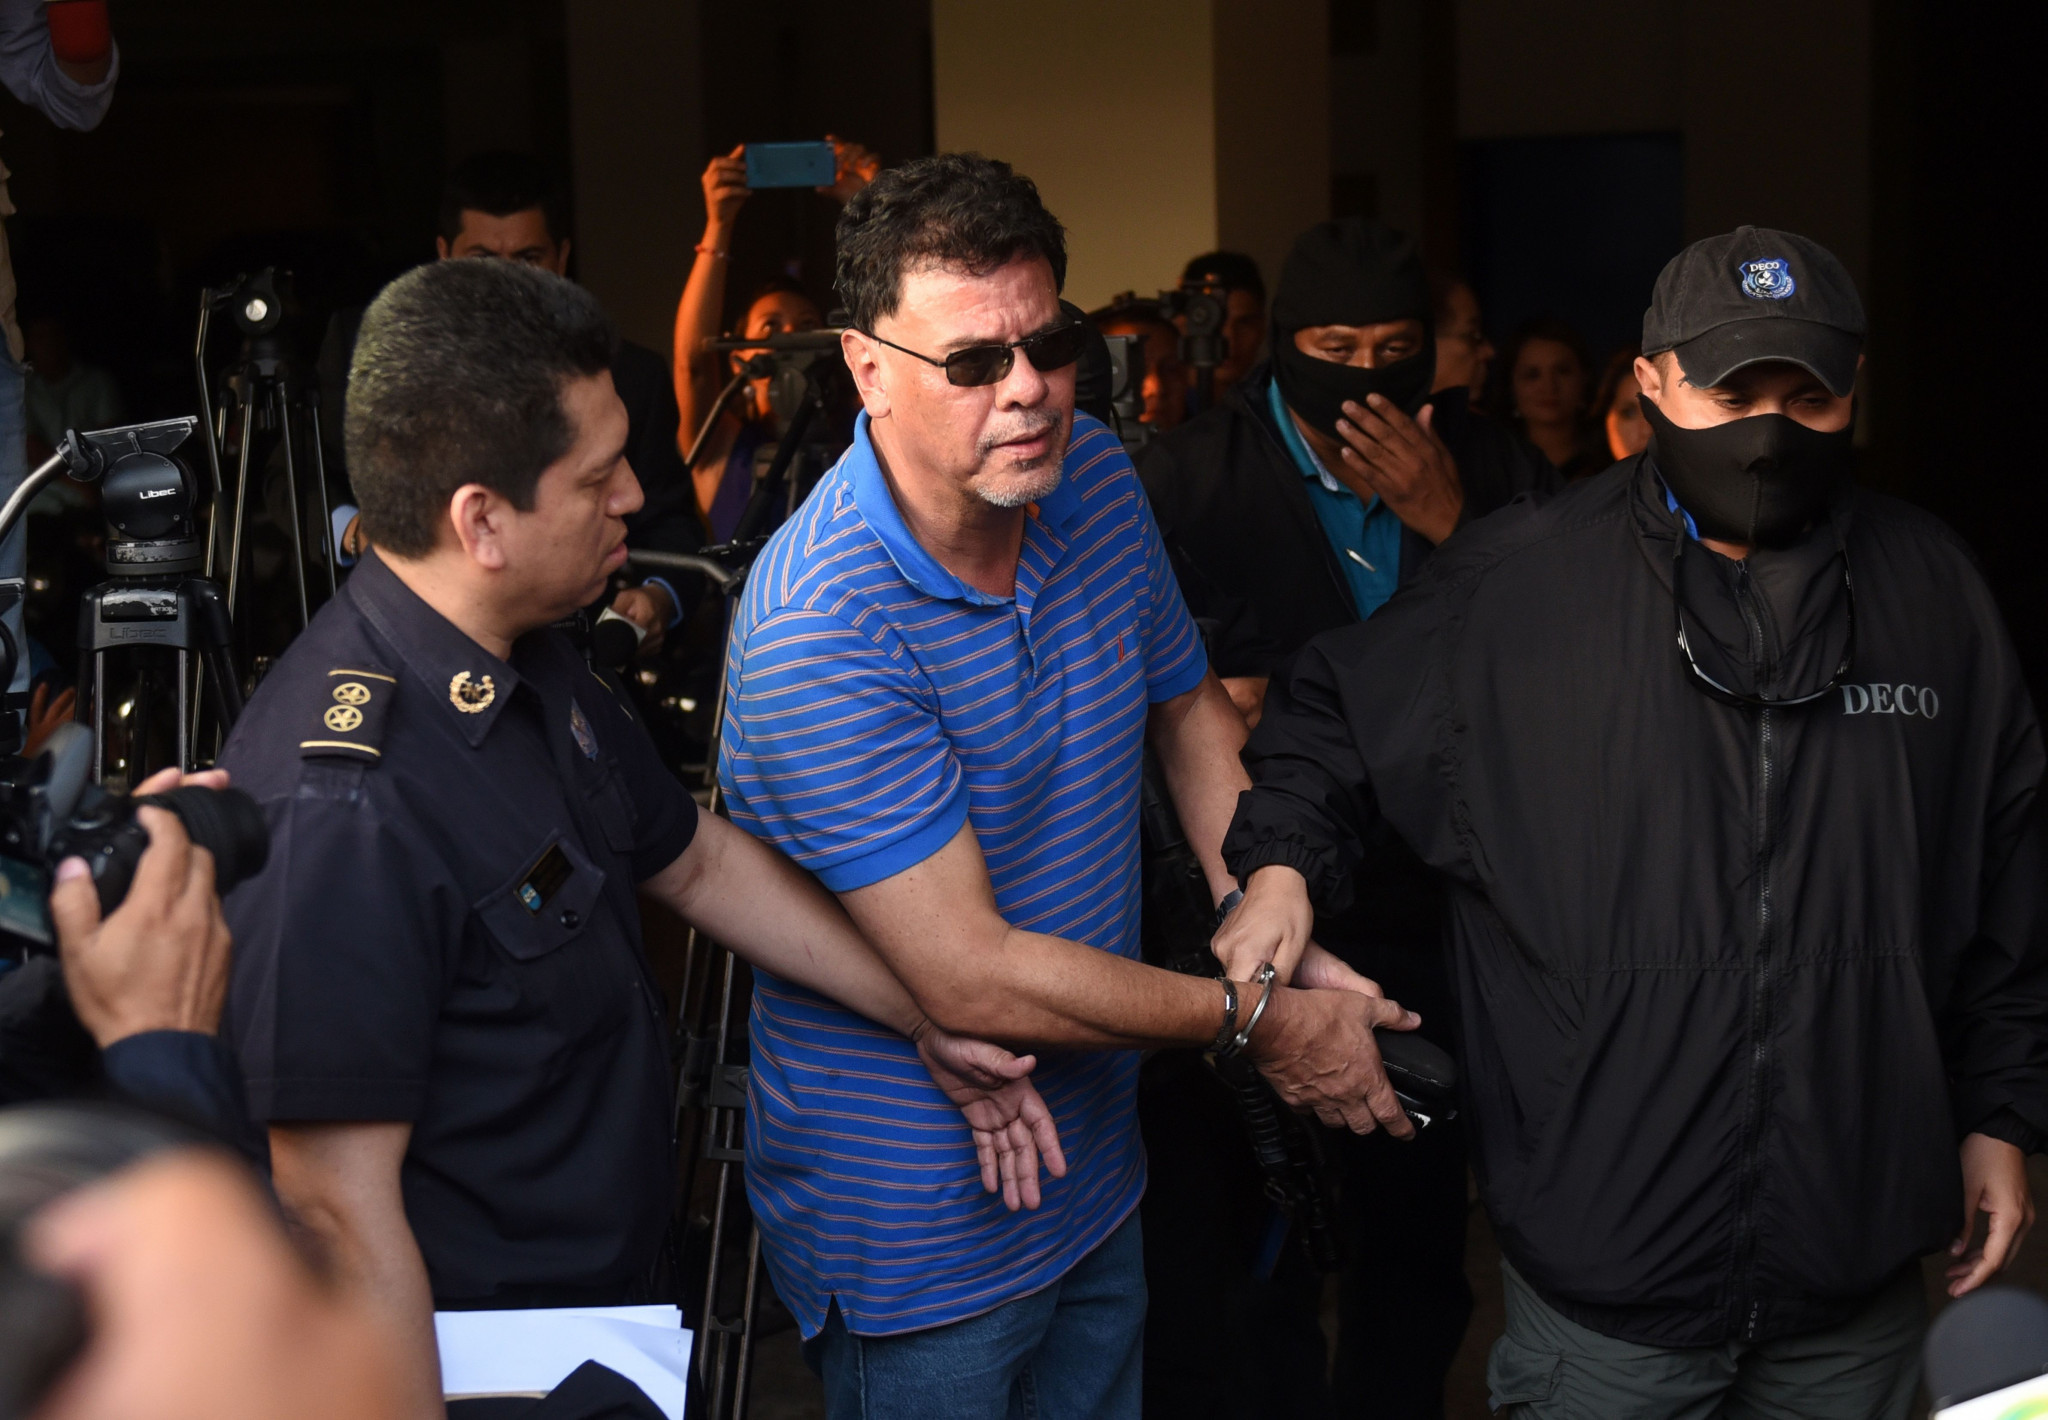 Former El Salvador Football Association President Reynaldo Vasquez last week became the 27th person to plead guilt to fraud charges since the revelations broke in 2015 ©Getty Images